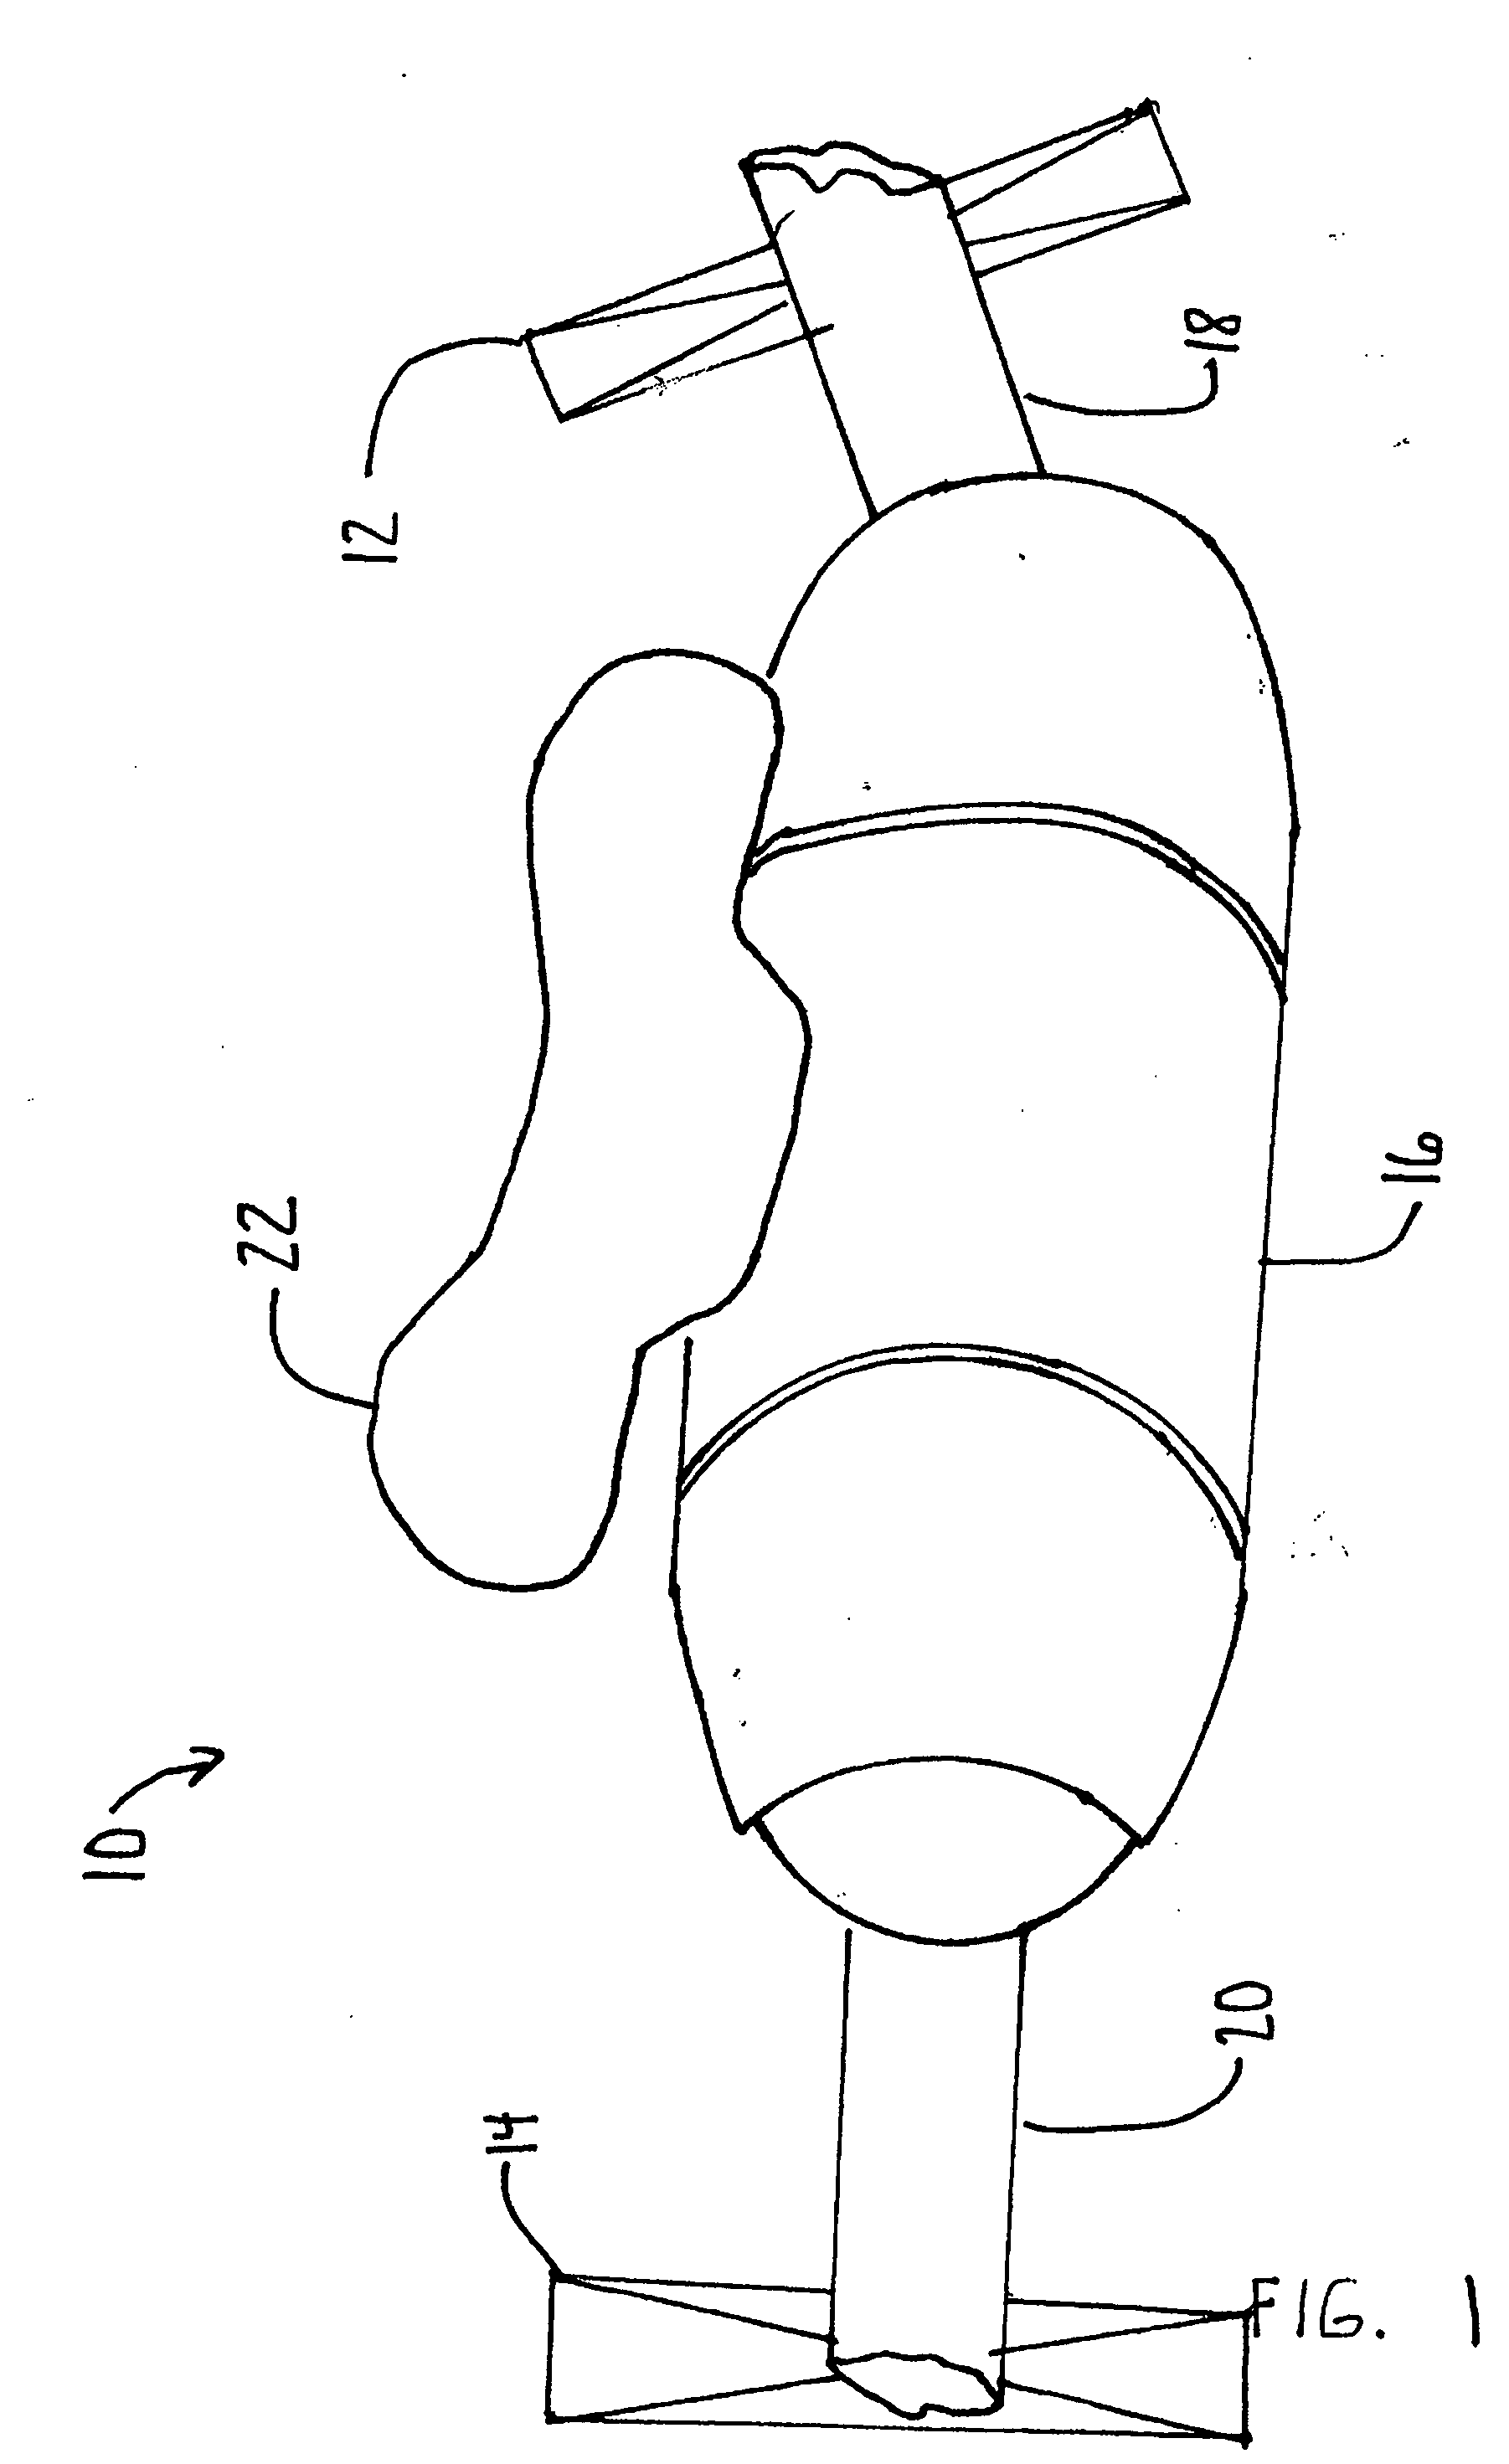 Orthopaedic instrument joint, instrument and associated method